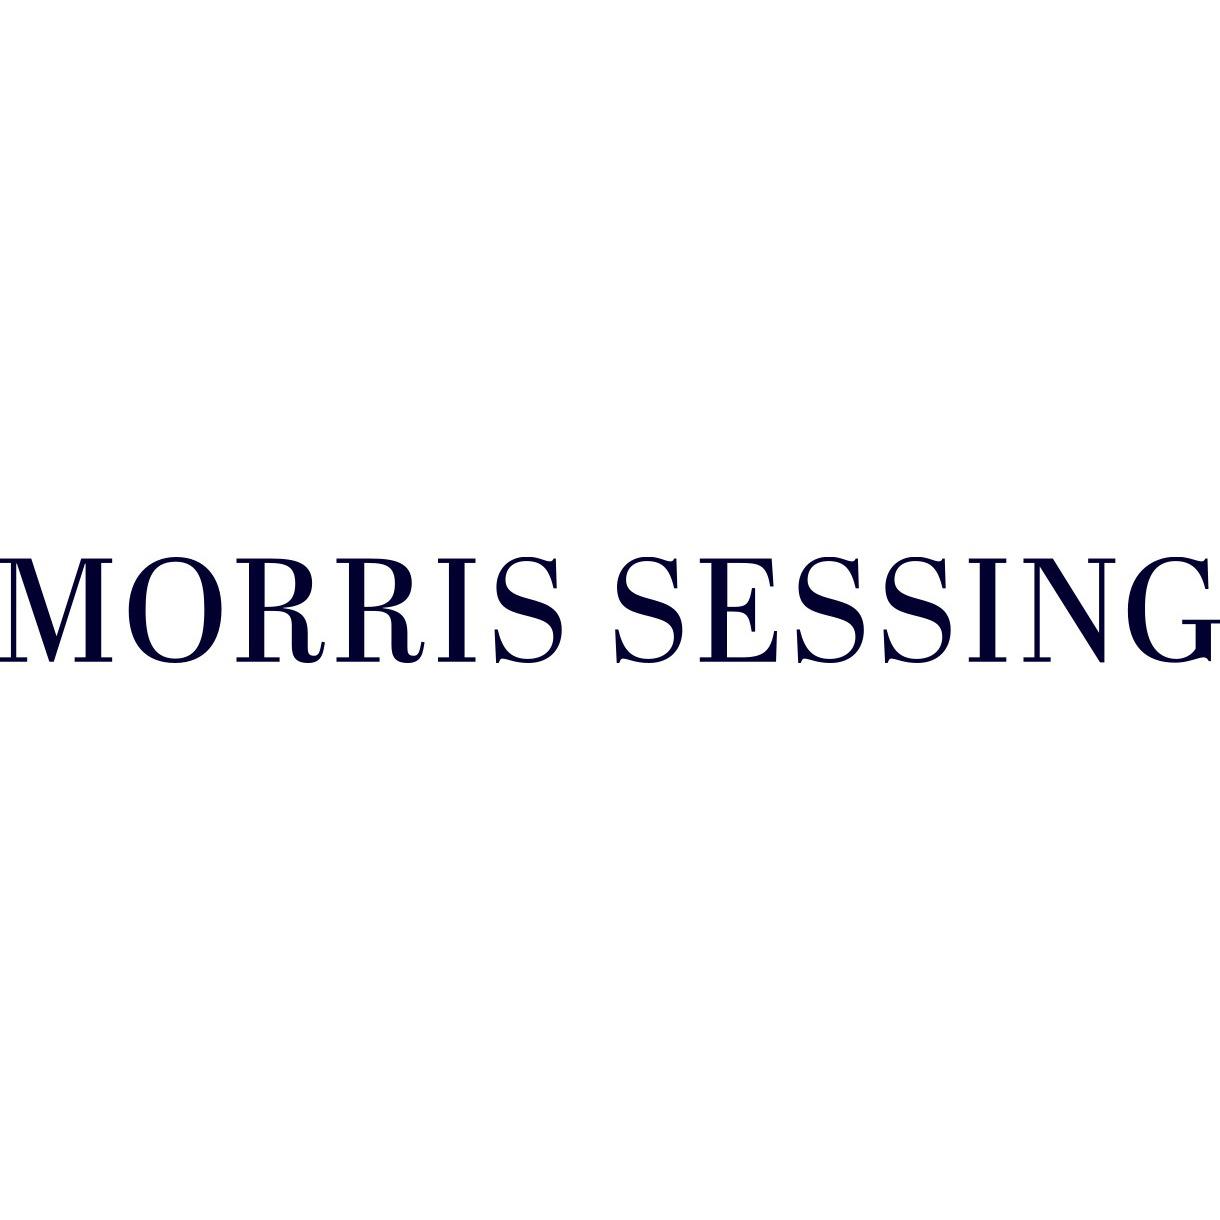 Morris Sessing - Germantown, MD 20874 - (301)637-0143 | ShowMeLocal.com